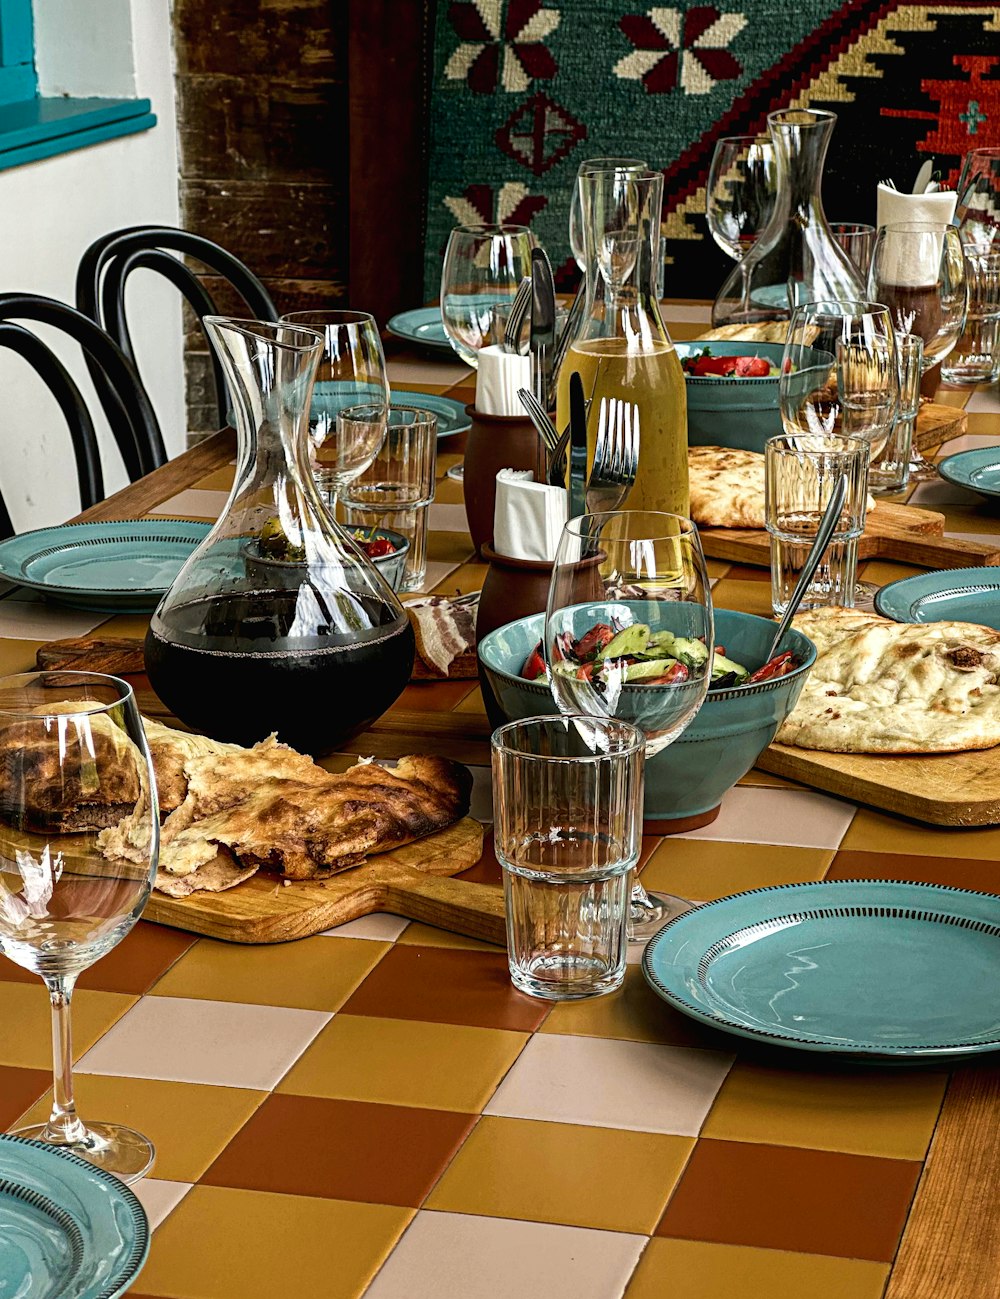 a table with many dishes and glasses on it